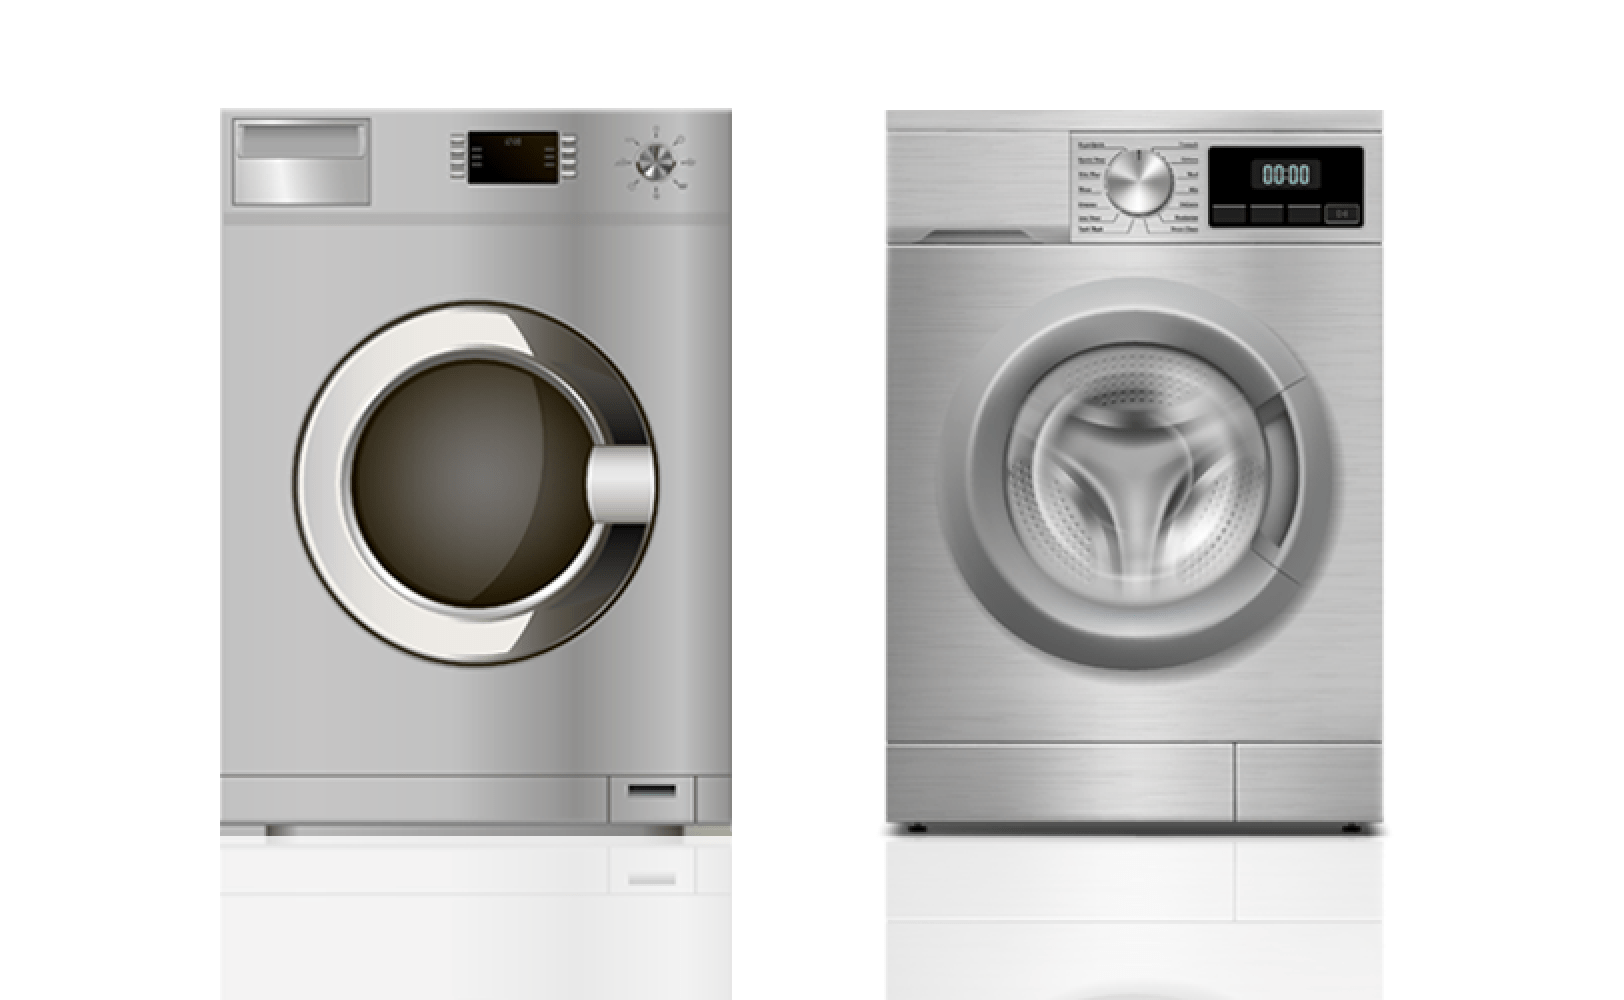 Washer Repair Service in Lakeside